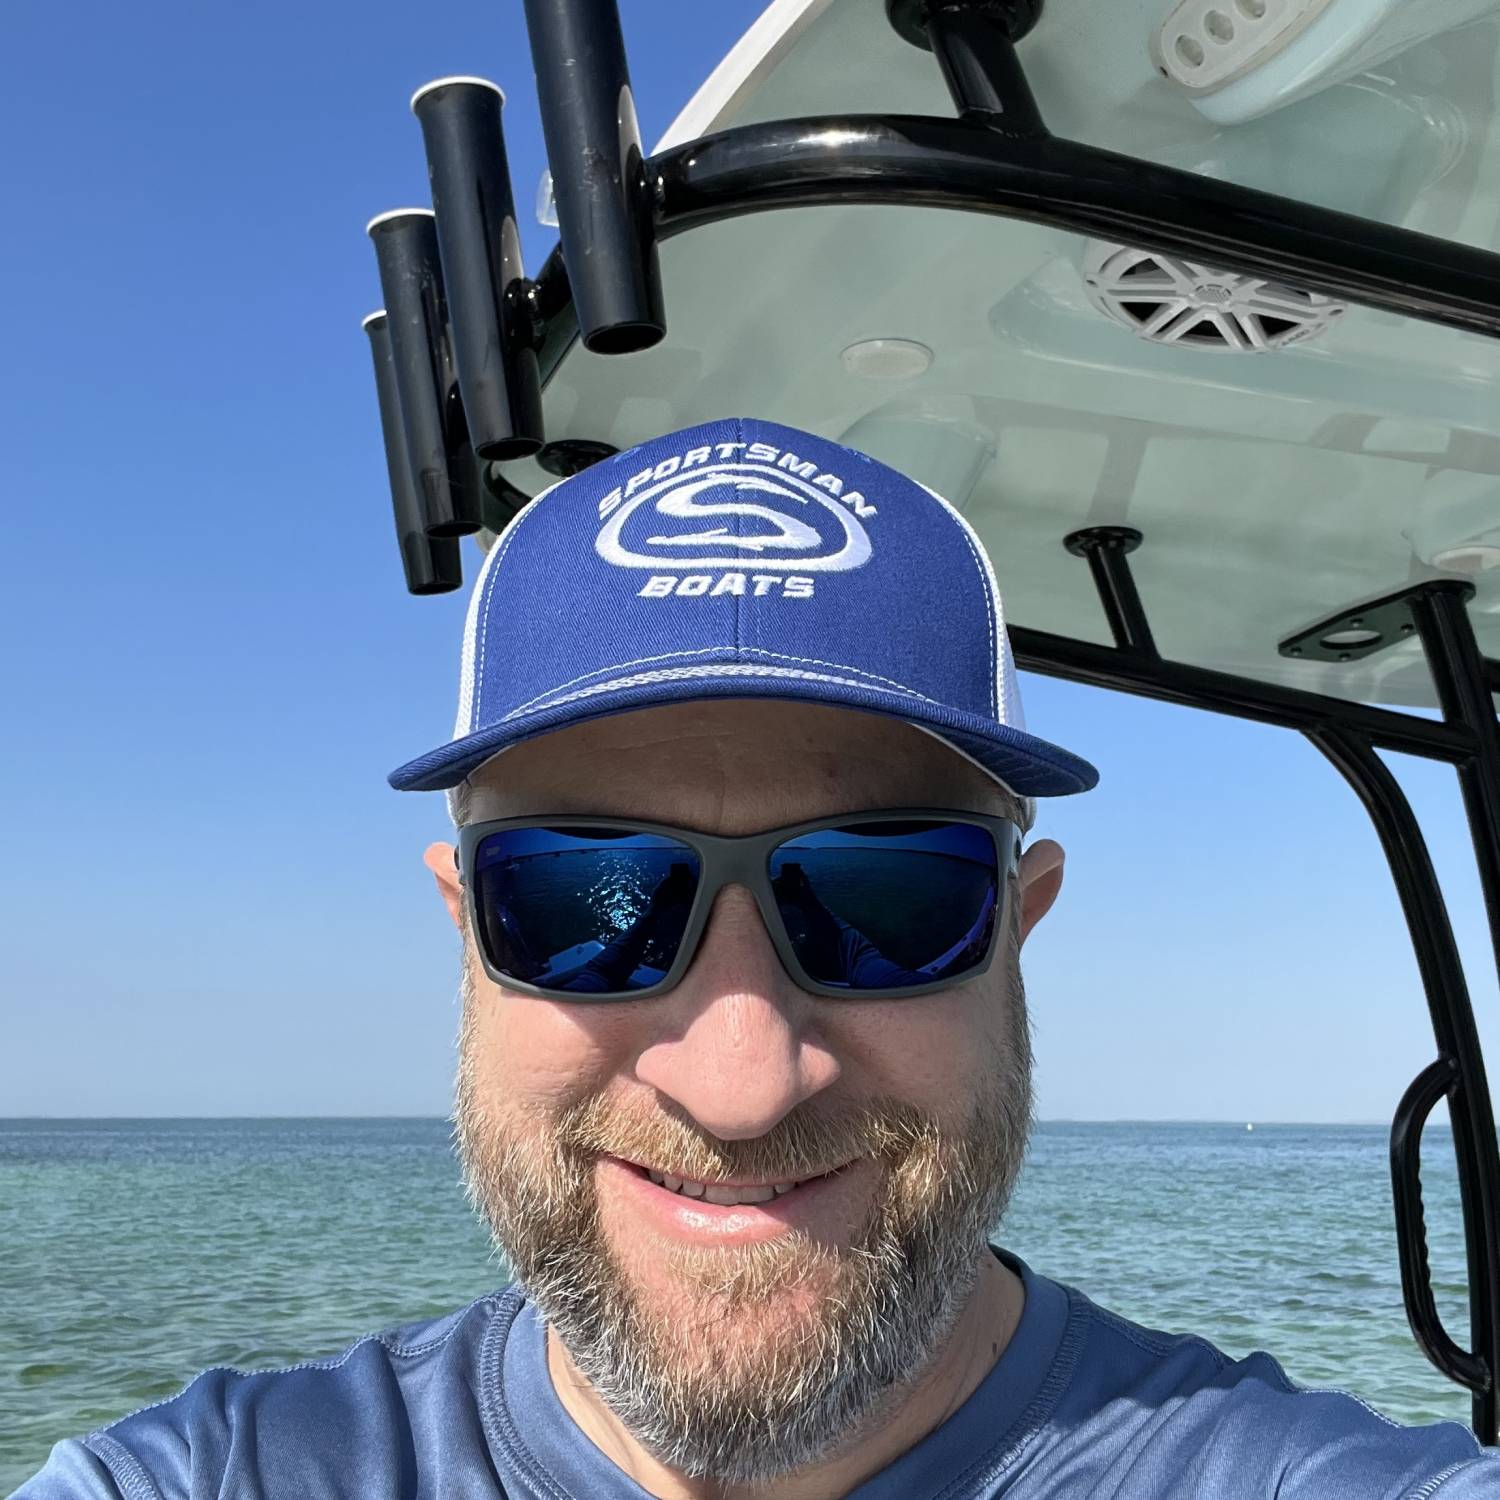 Title: Shades of Blue - On board their Sportsman Heritage 231 Center Console - Location: Biscayne National Park. Participating in the Photo Contest #SportsmanMarch2023